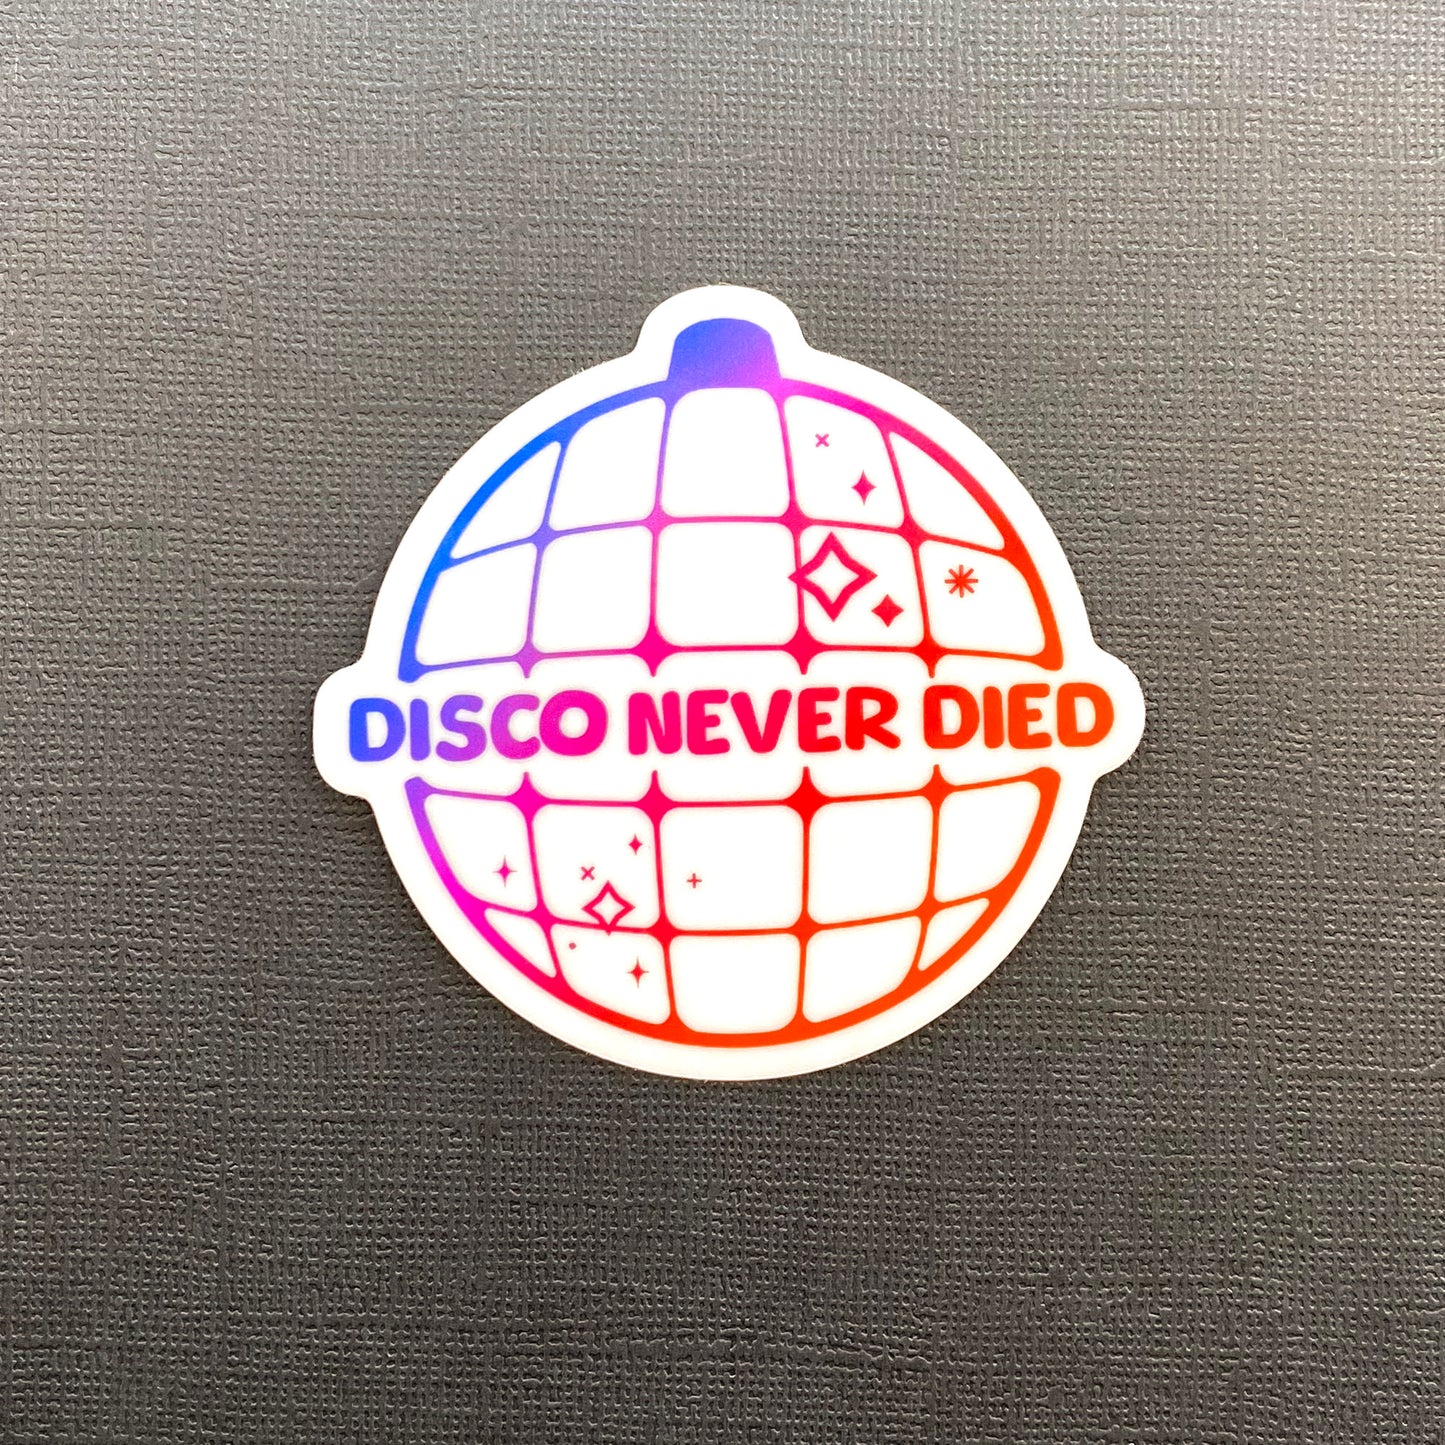 A single, holographic "Disco Never Died" sticker on a black background. The sticker features a purple to pink to orange gradient.